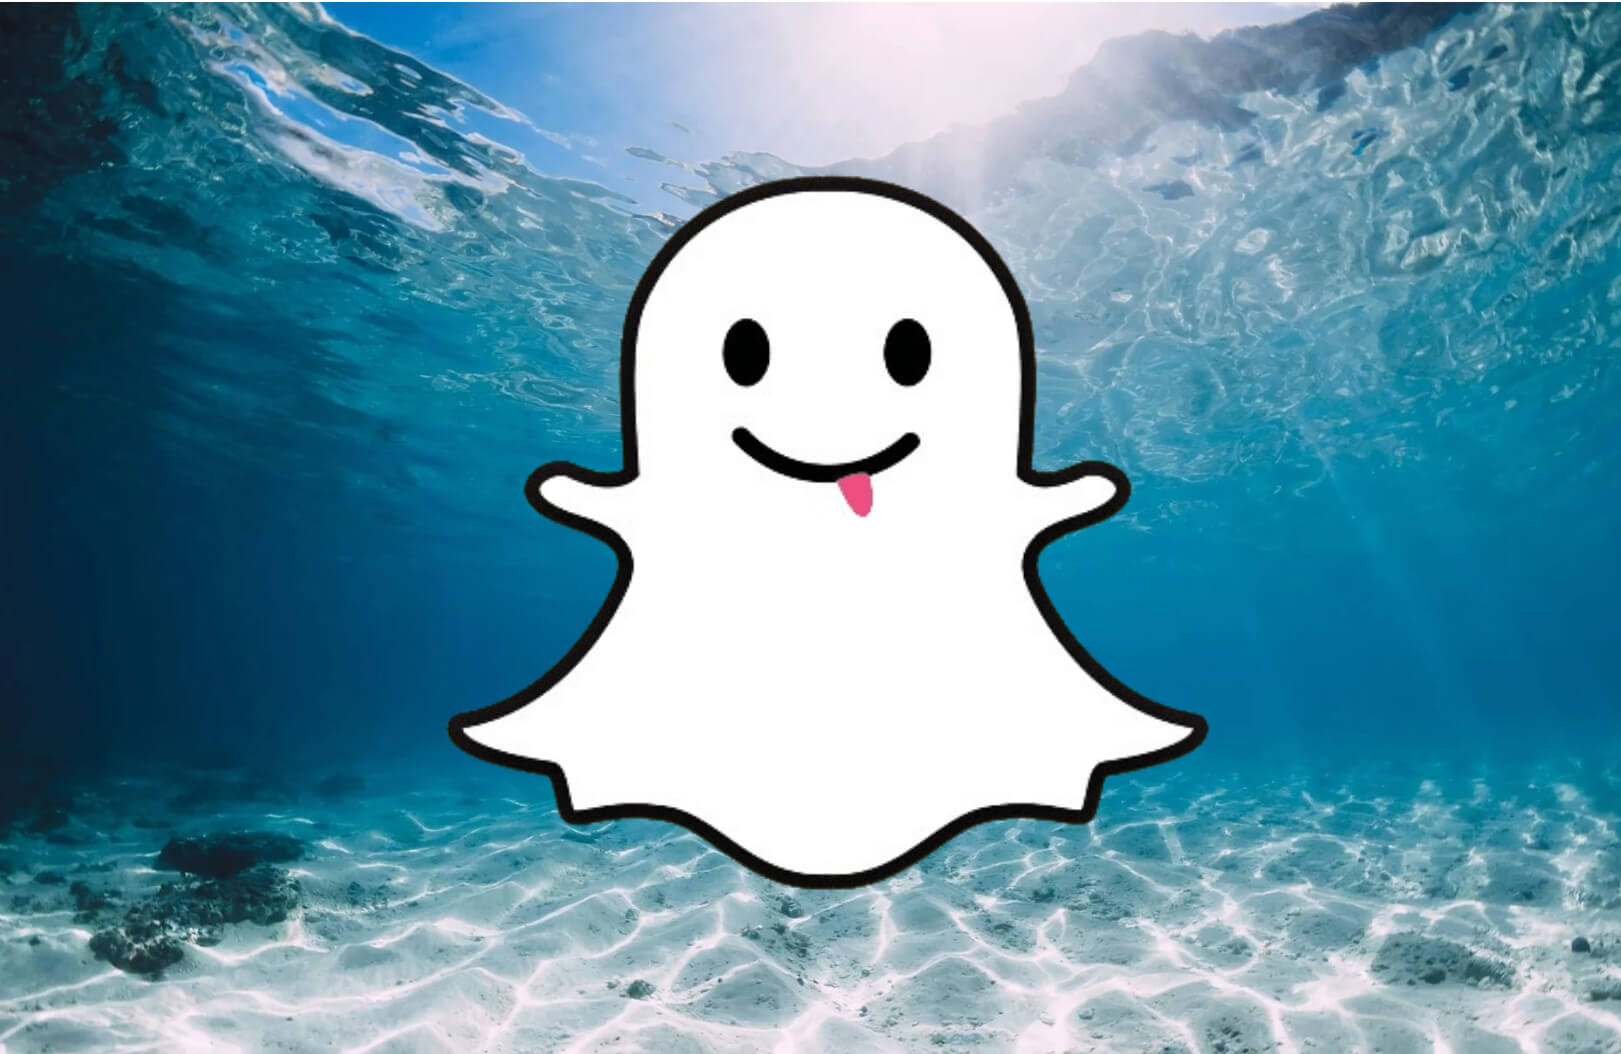 Financial Analysis - Is Snapchat Stock NYSE:SNAP a Buy ?